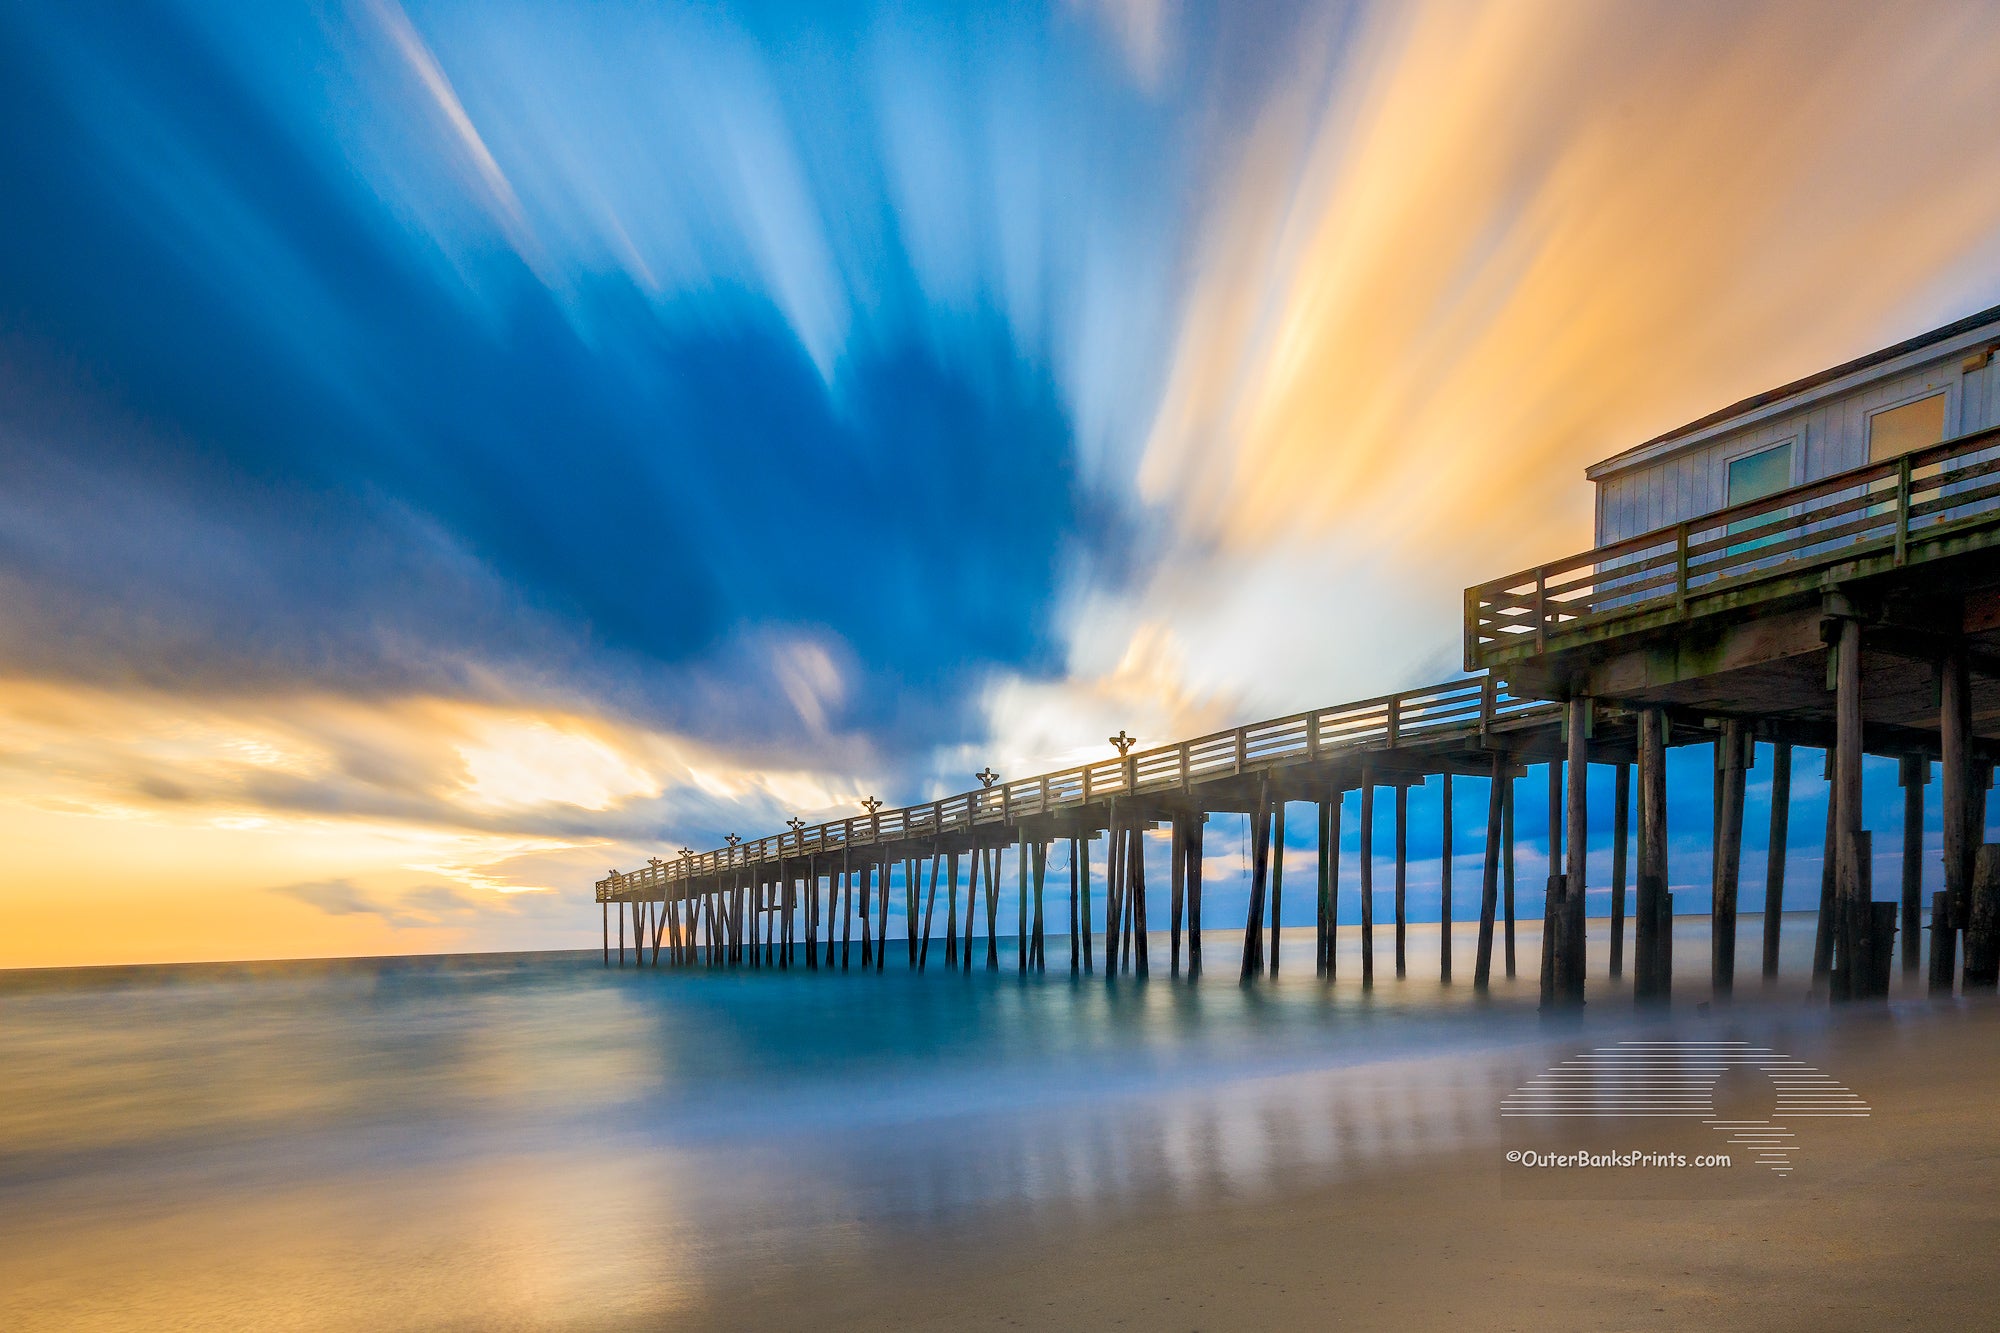 Long exposure showing the motion of the clouds and surf at Kitty Hawk Fishing Pier sunrise on the Outer Banks of NC.